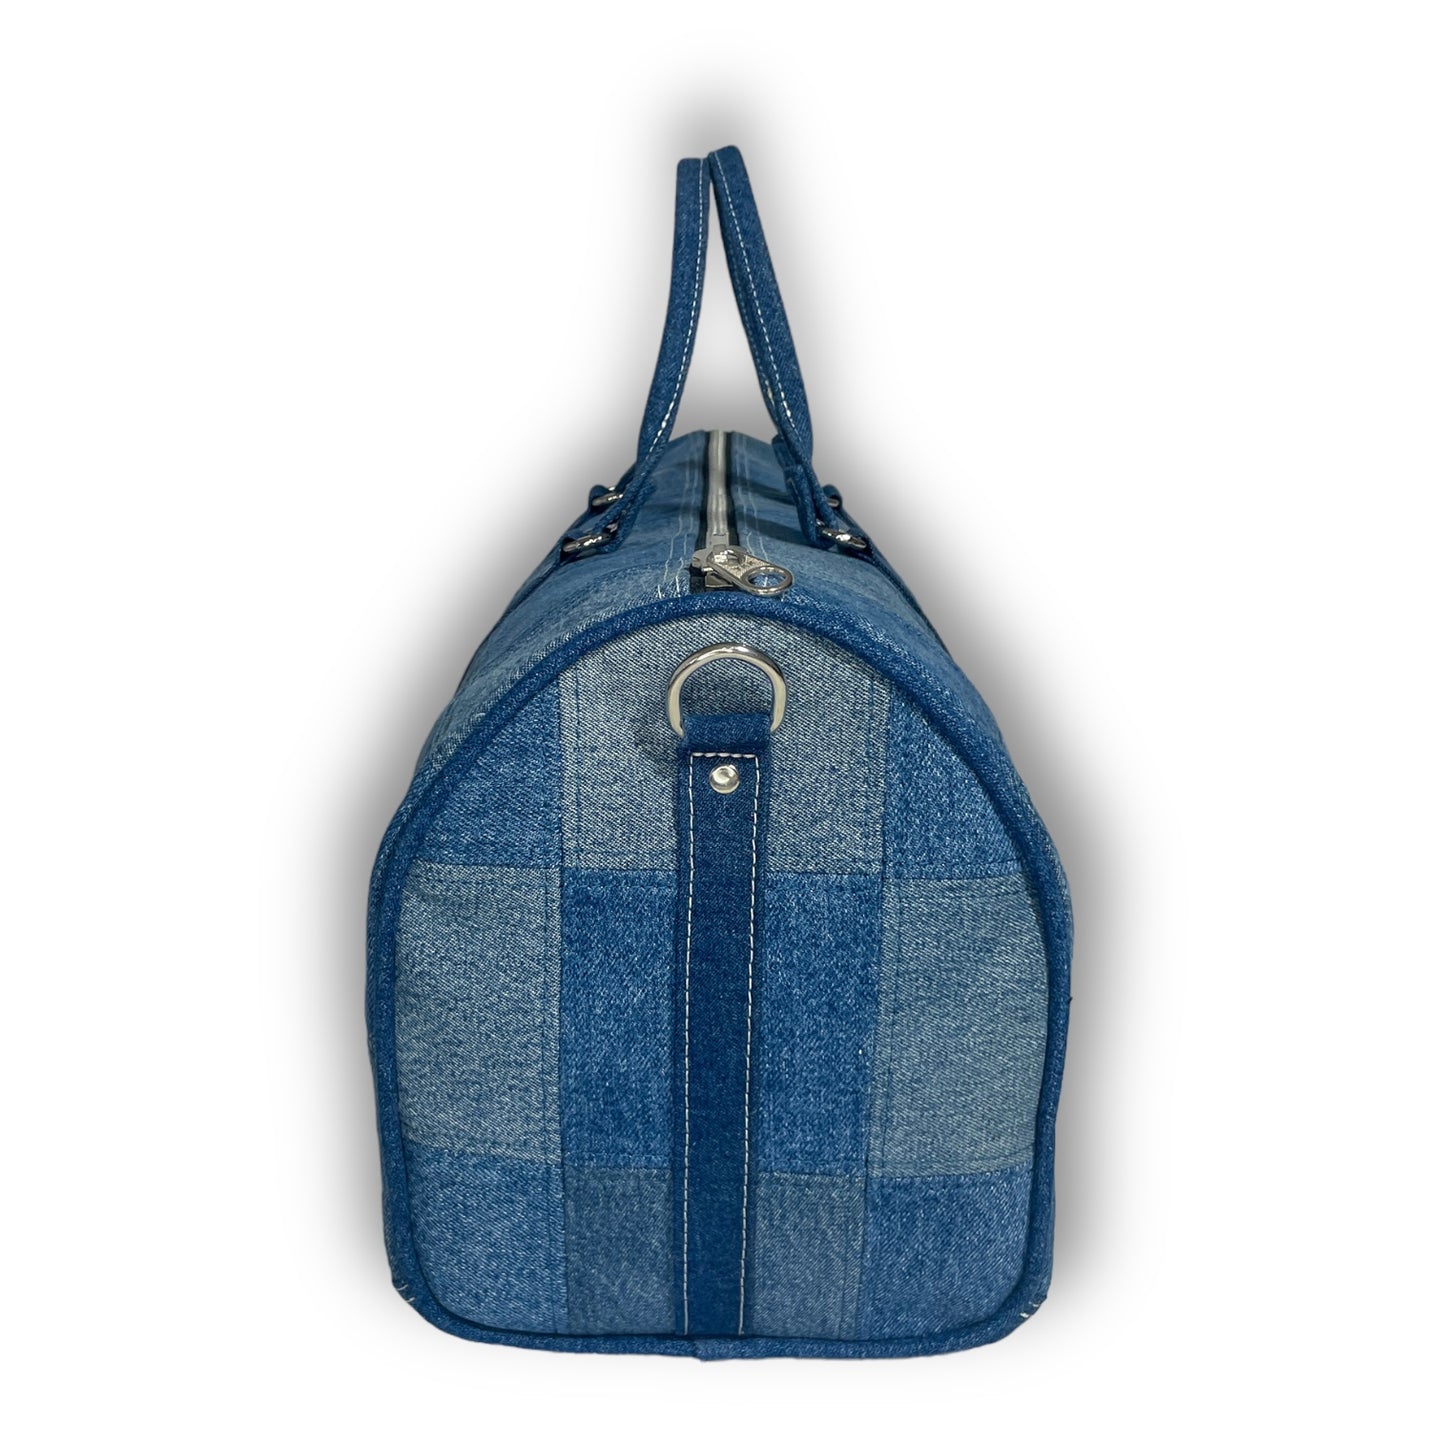 Blue Checkered Duffle Bag (Archived Dreams Collab)